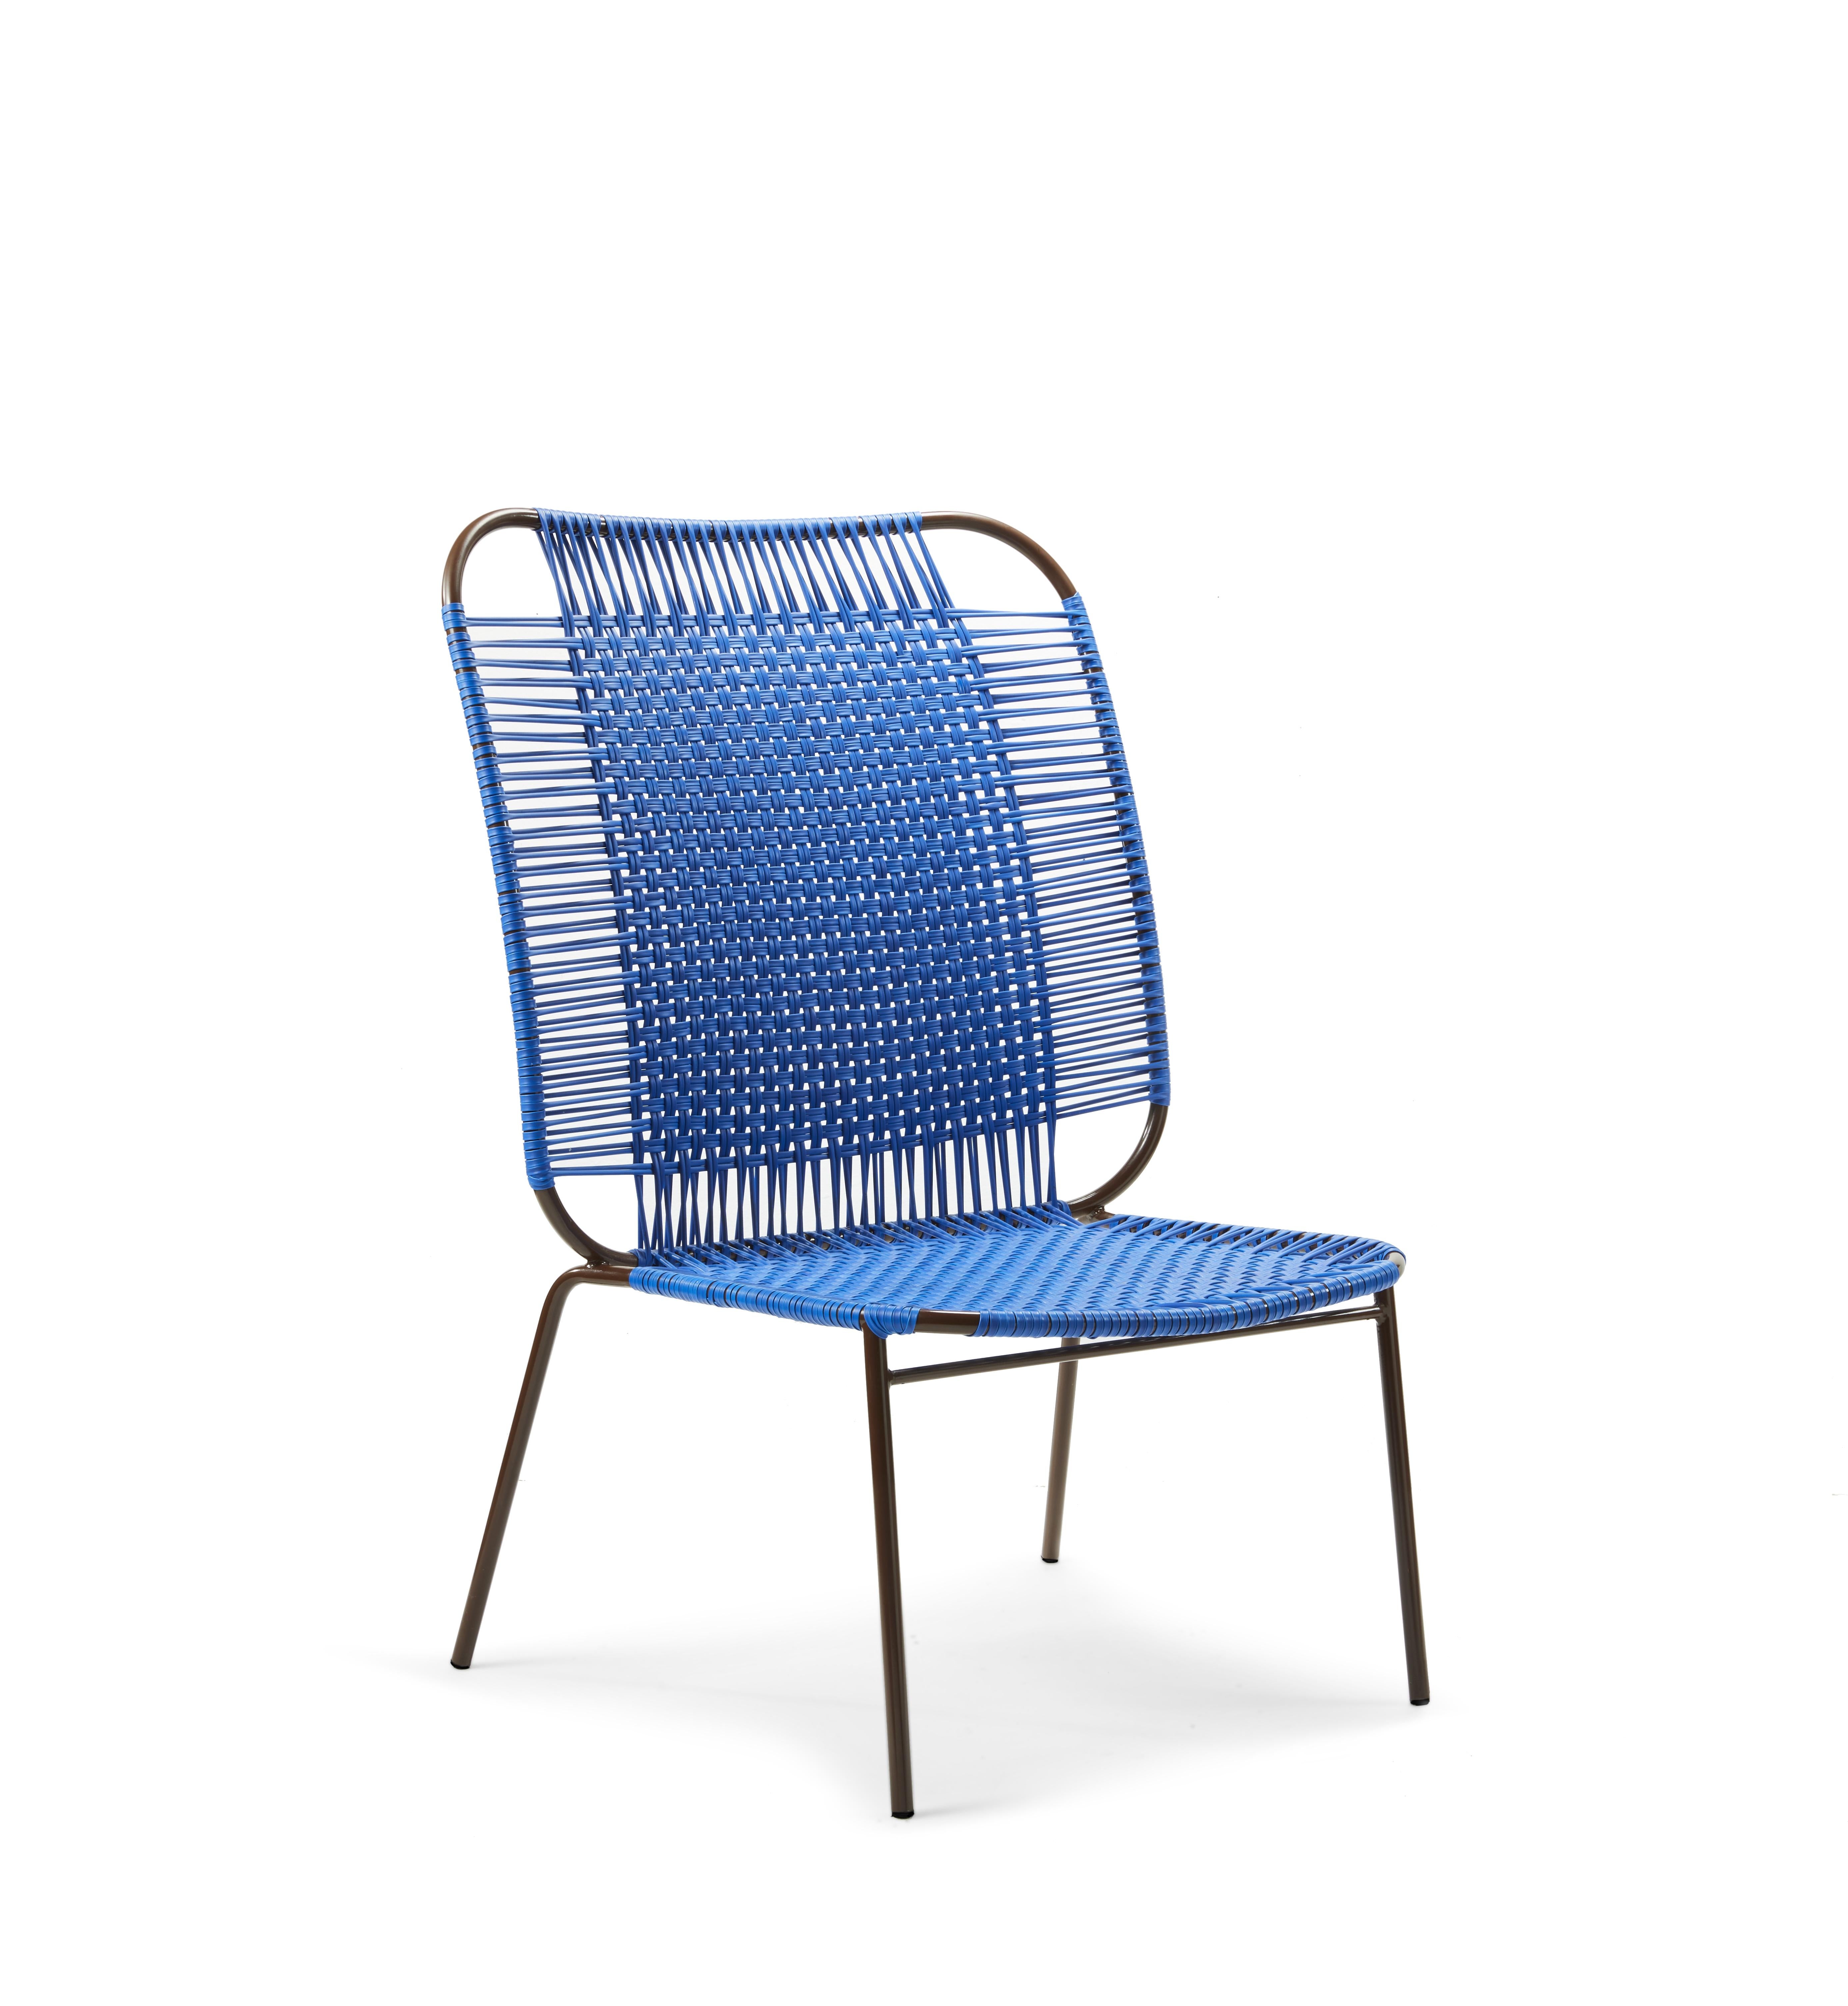 Set of 2 Blue Cielo lounge high chair by Sebastian Herkner
Materials: Galvanized and powder-coated tubular steel. PVC strings are made from recycled plastic.
Technique: Made from recycled plastic and weaved by local craftspeople in Cartagena,